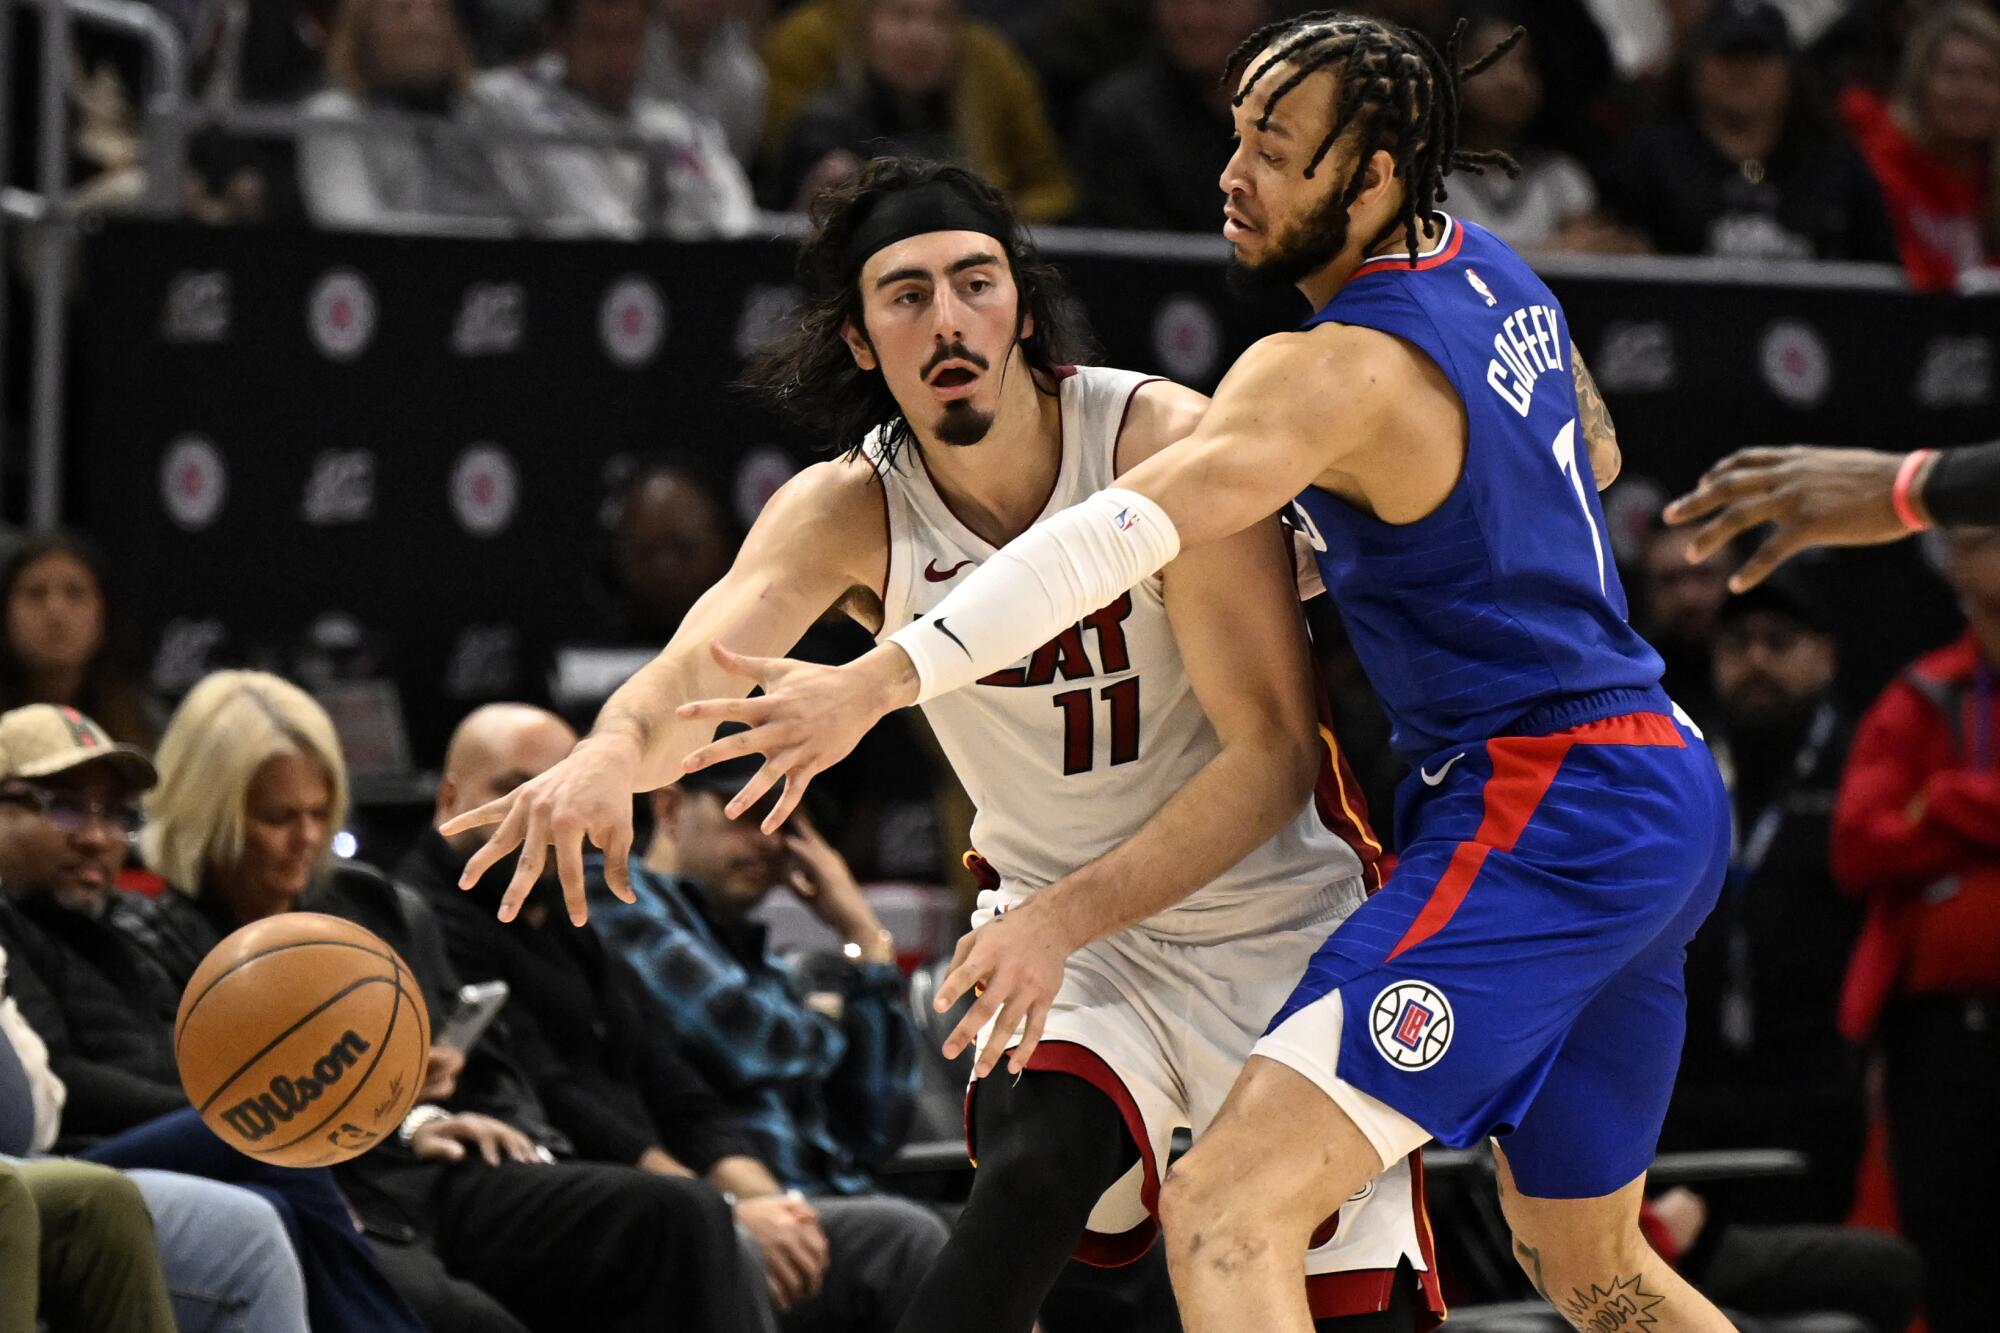 Heat guard Jaime Jaquez Jr. passes the ball away from Clippers guard Amir Coffey.